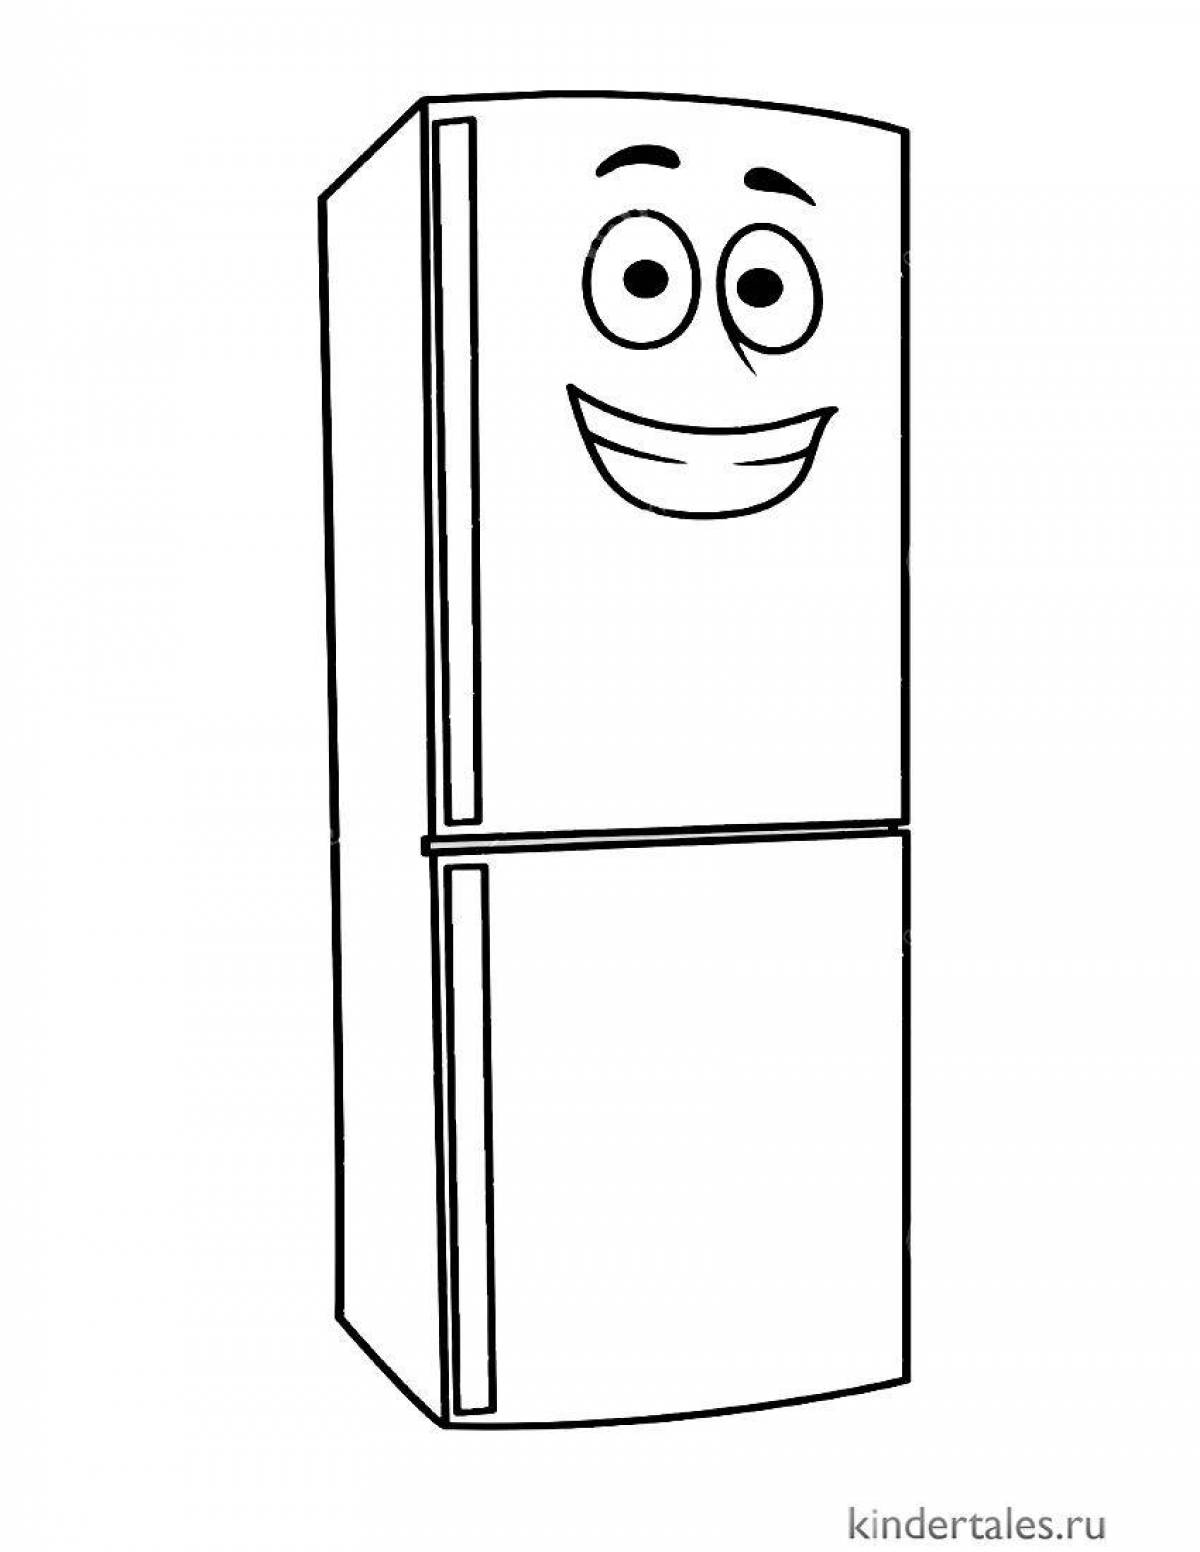 Fridge coloring page with color splashes for kids